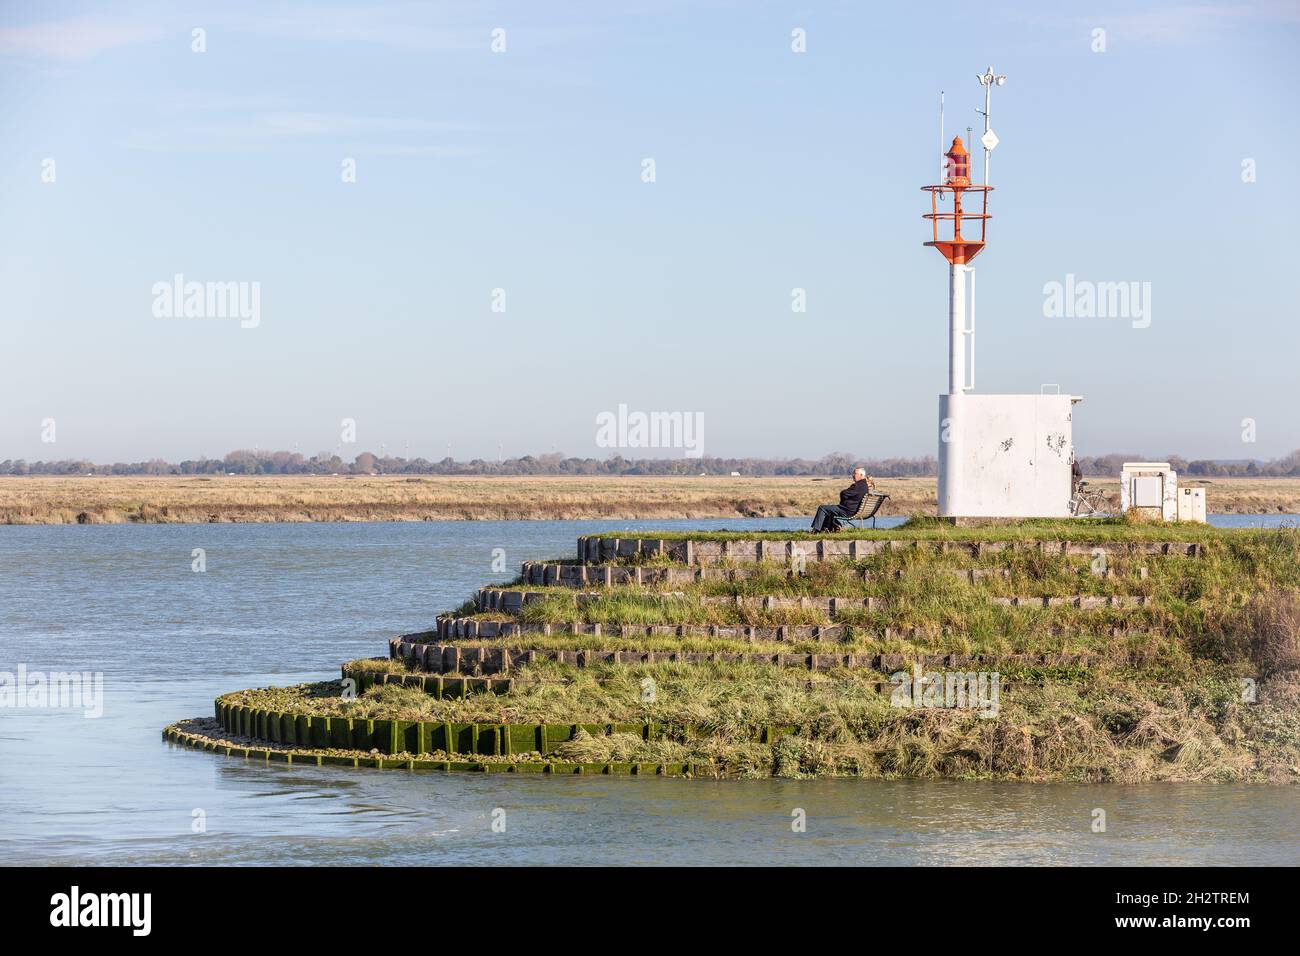 Beacon marking access to the port of Saint-Valery, man sitting on bench. Bay of Somme. France Stock Photo